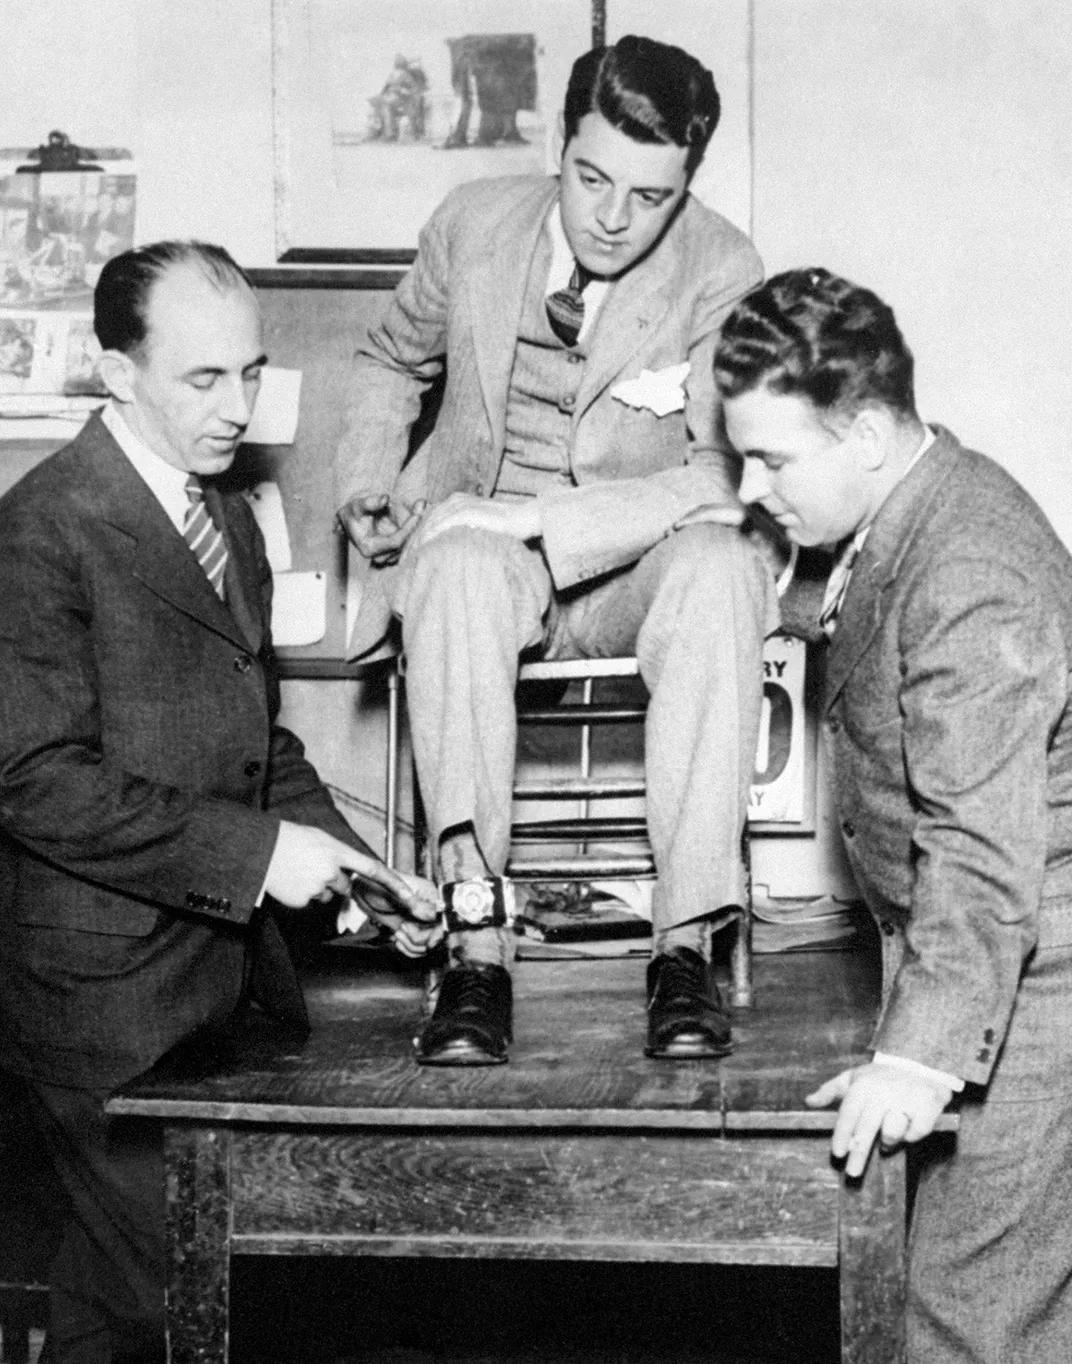 Photographer Tom Howard (seated) shows how he strapped a camera to his ankle to photograph Snyder's execution.